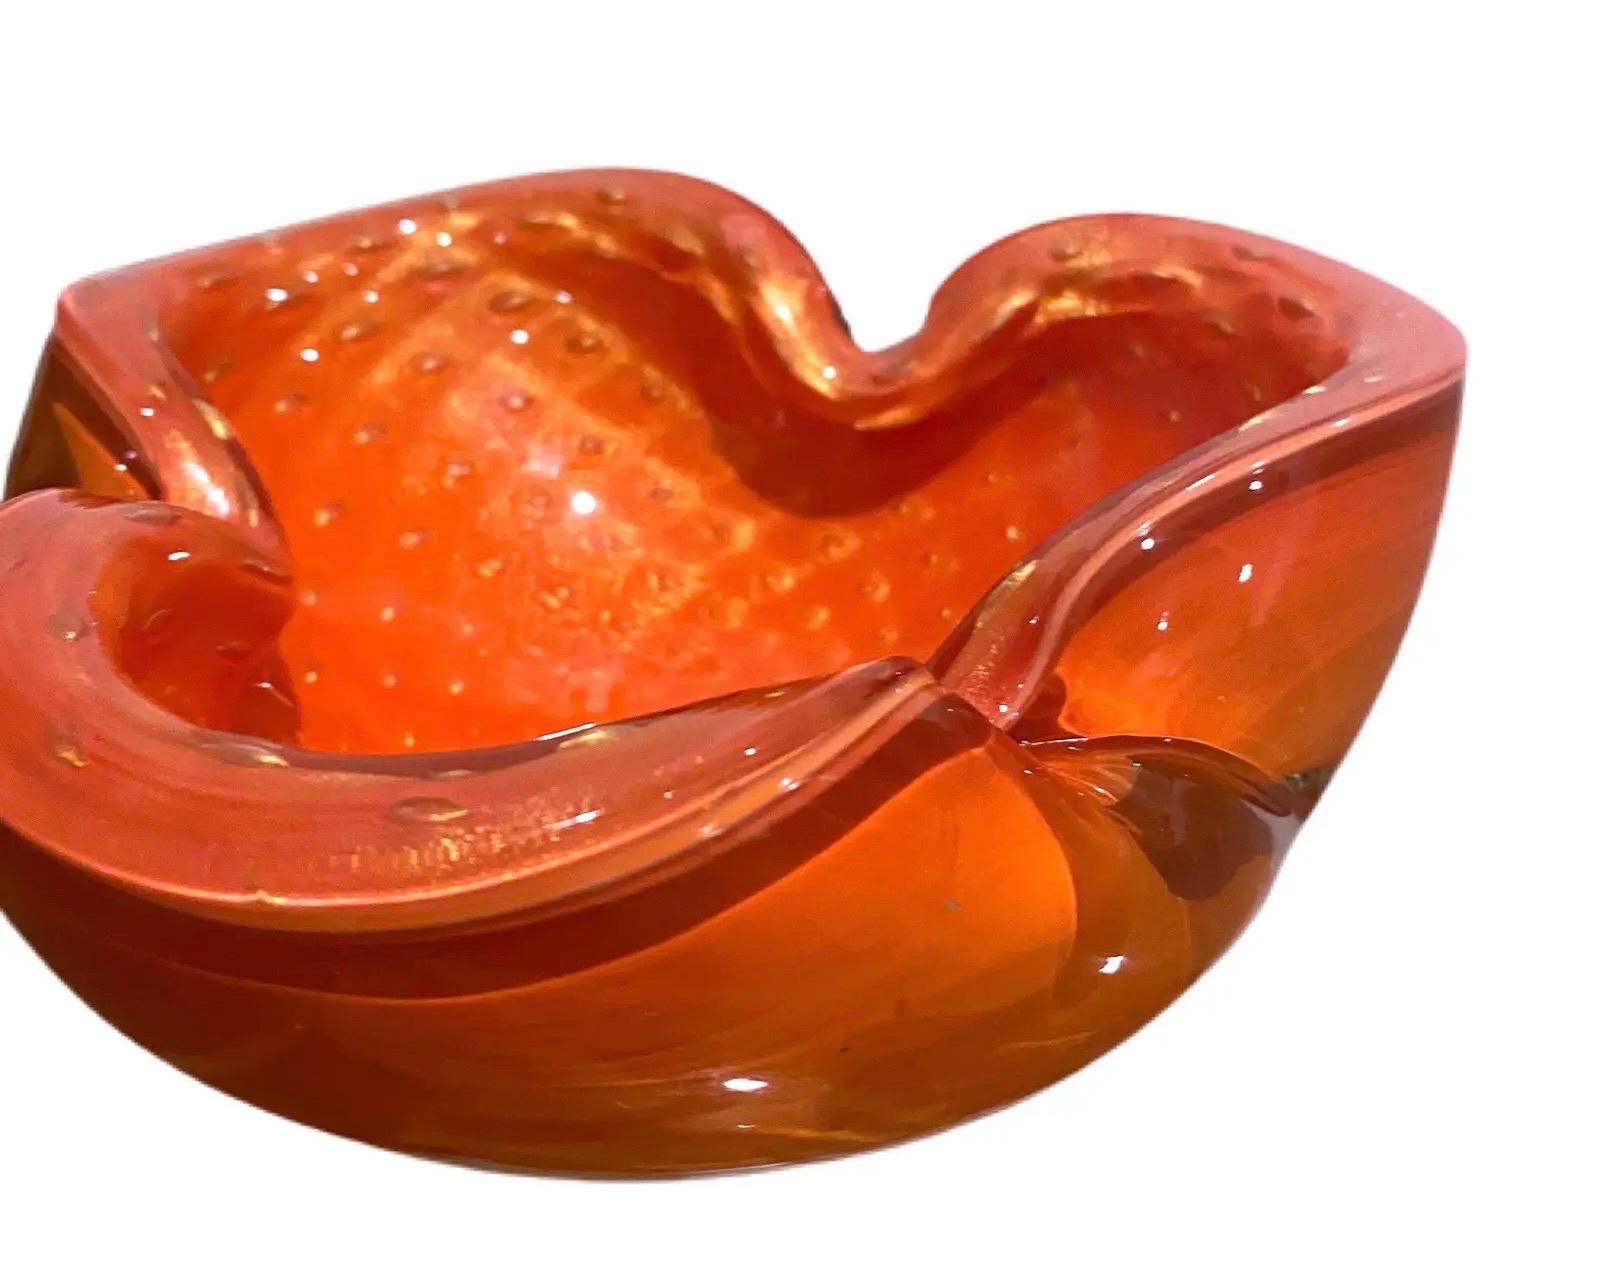 A Murano Cased Orange Glass Bowl with heavy Gold Flecks, by Alfredo Barbini. 1950s. Organic shape, flat ground and polished base.Orange and Colorless glass, layer of suspended gold flecks and controlled bubbles. 
Thick and heavy, very fine vintage